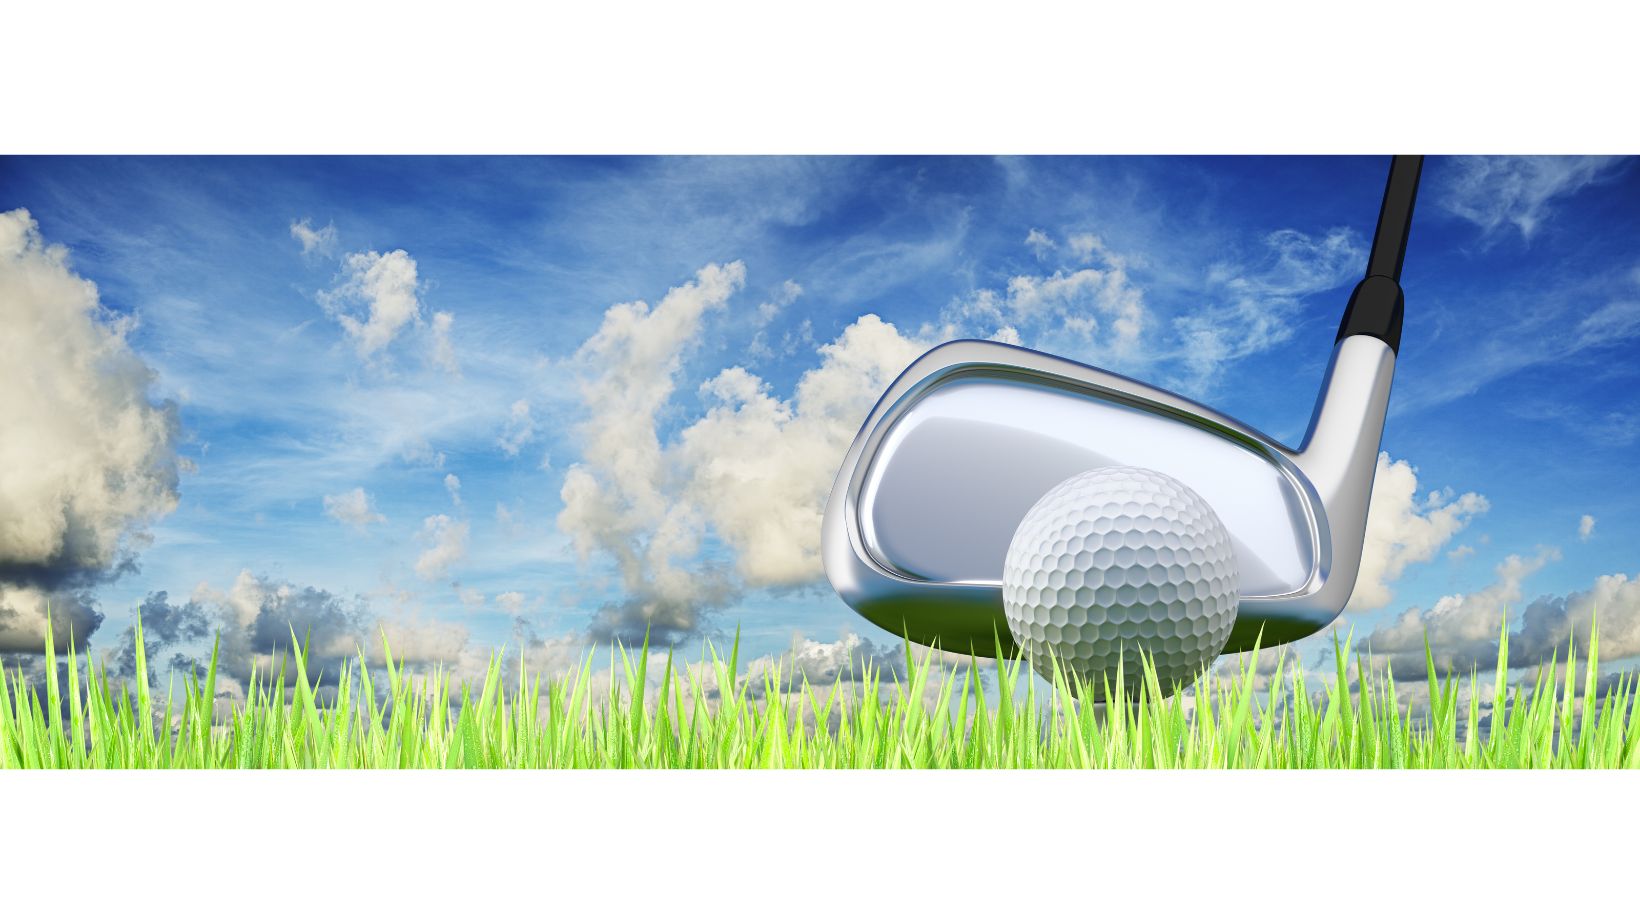 Does Simulator Golf Translate to Real Golf?